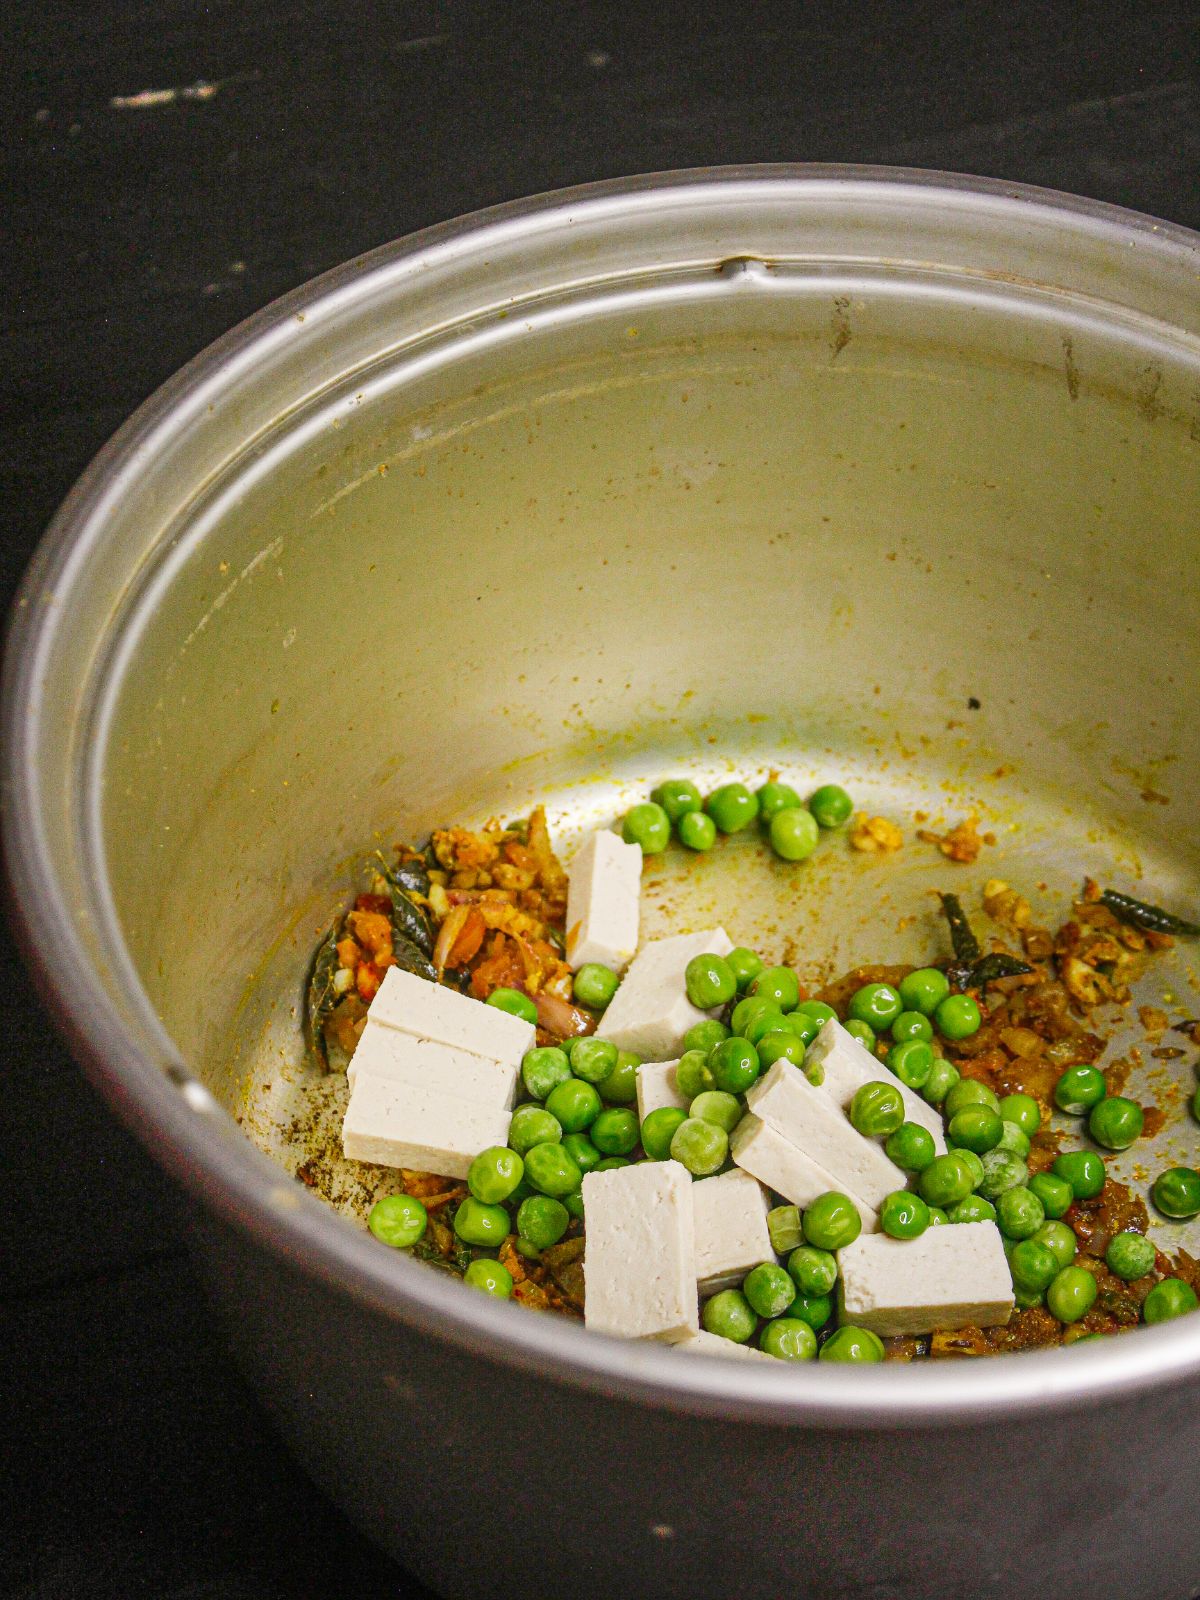 Add cubed tofu, peas and water to the pot and cook well